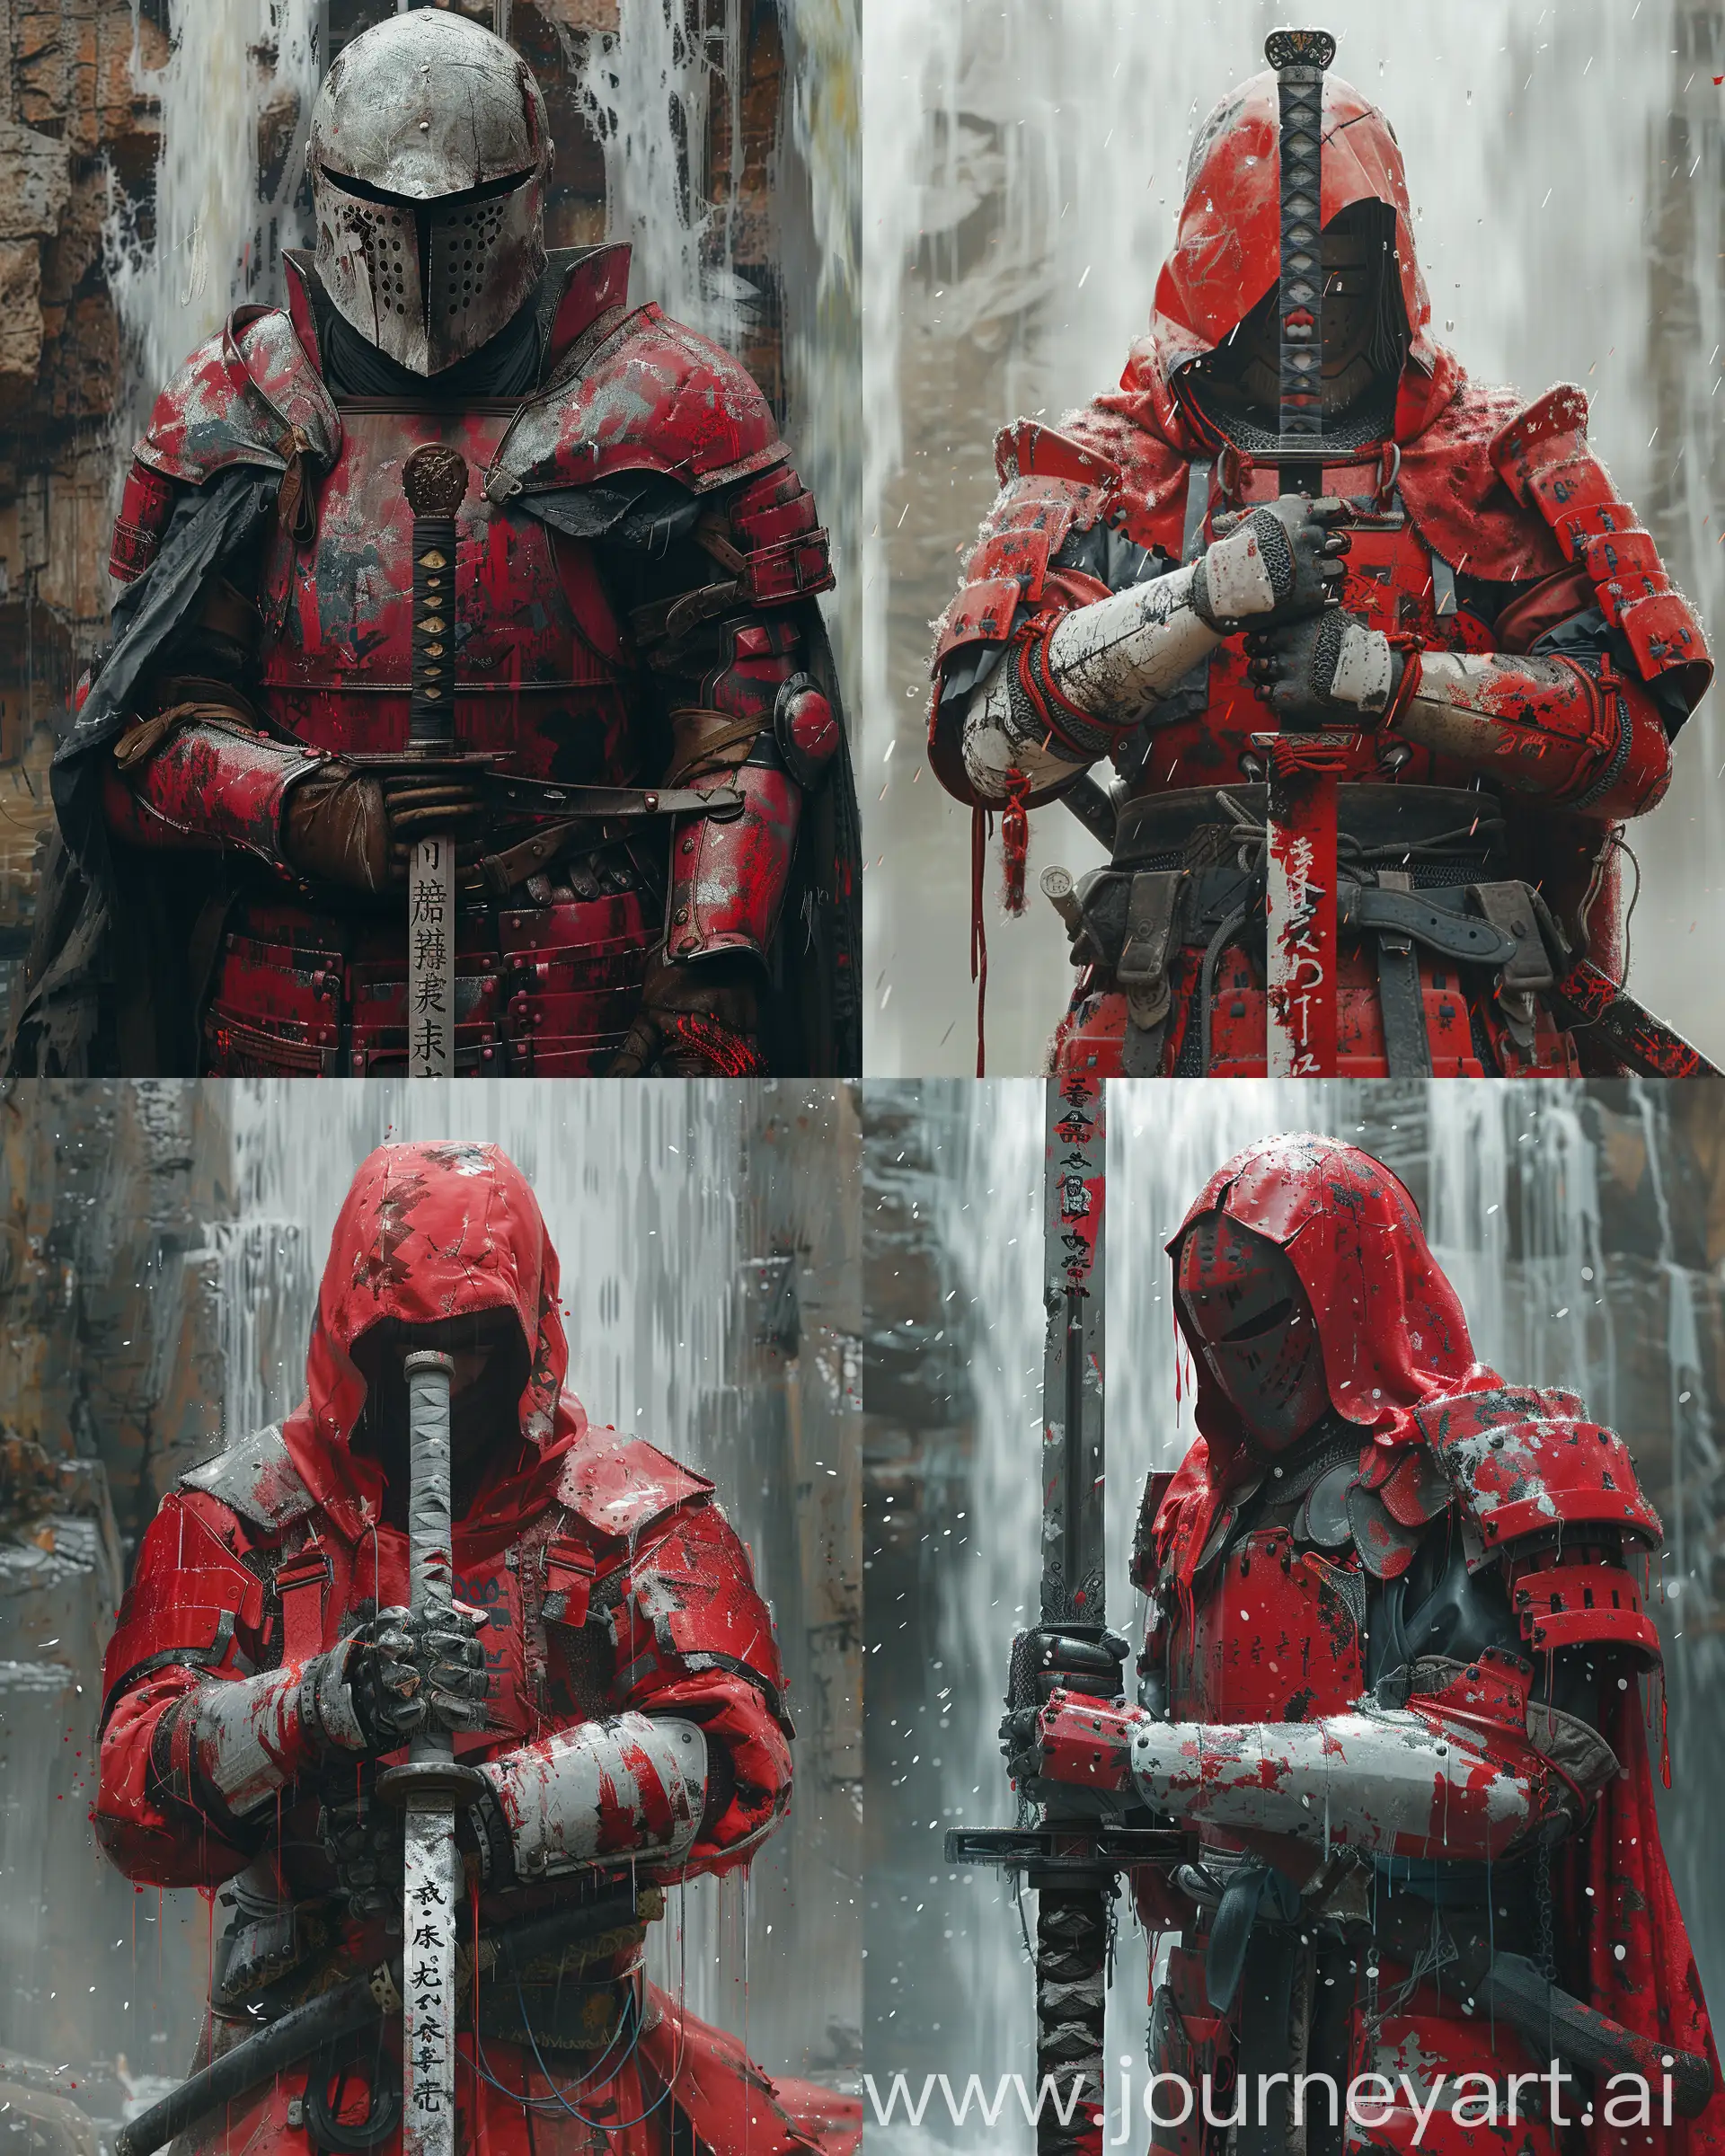 Medieval-Knight-Wielding-Sword-in-Cherry-Red-Armor-Against-Waterfall-Backdrop